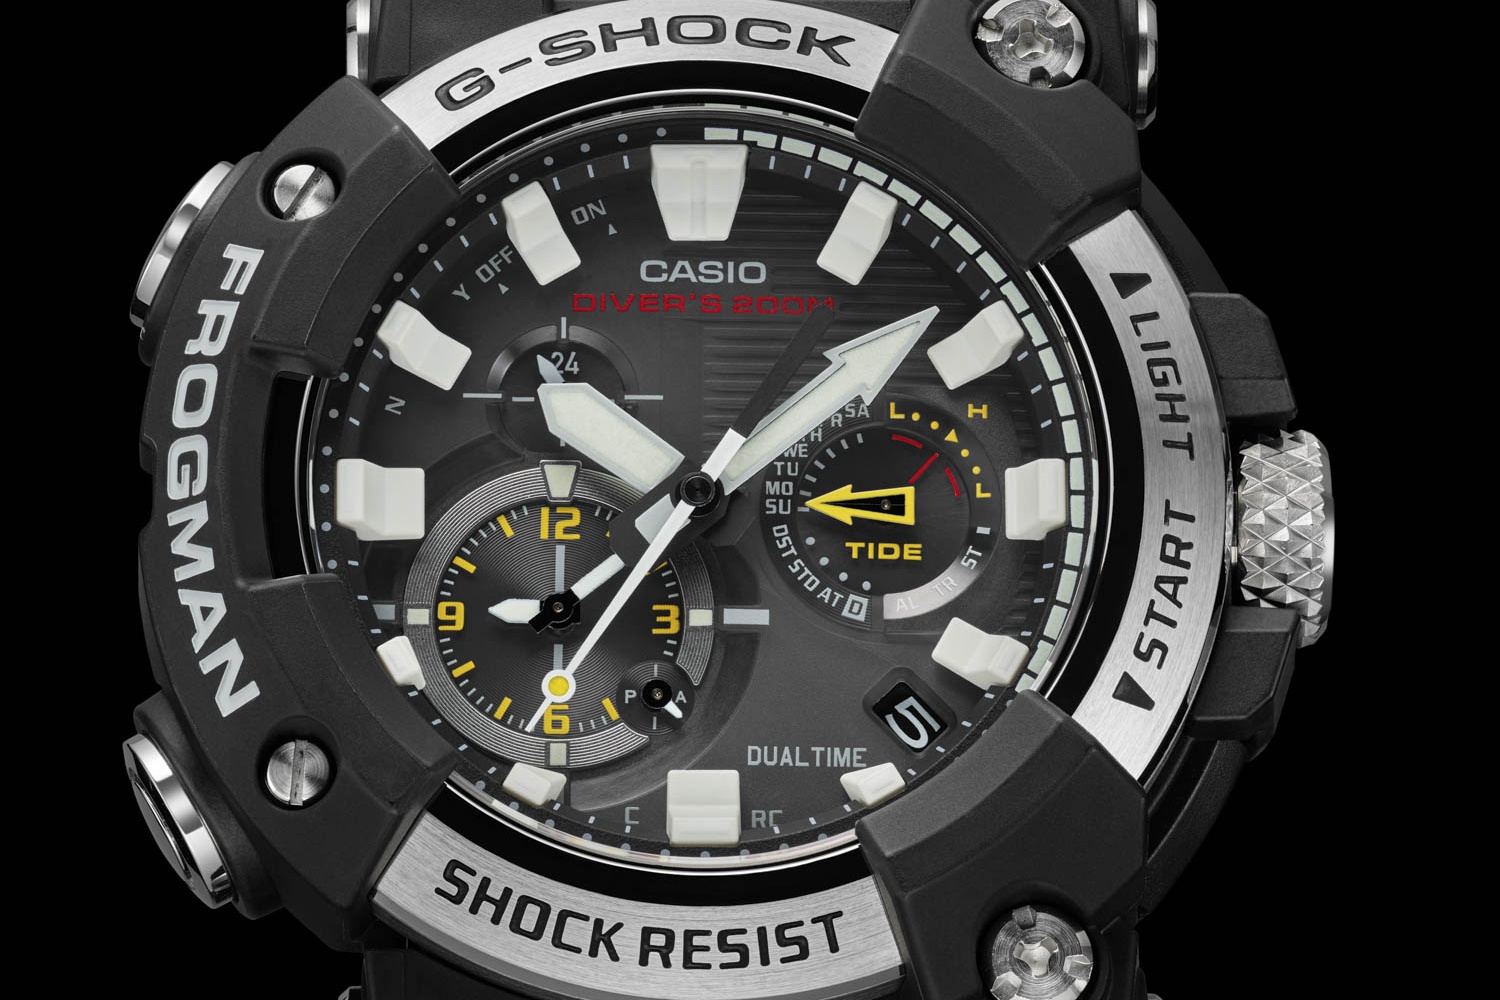 Latest G-Shock Frogman Has Bluetooth and an Analog Face | Digital 